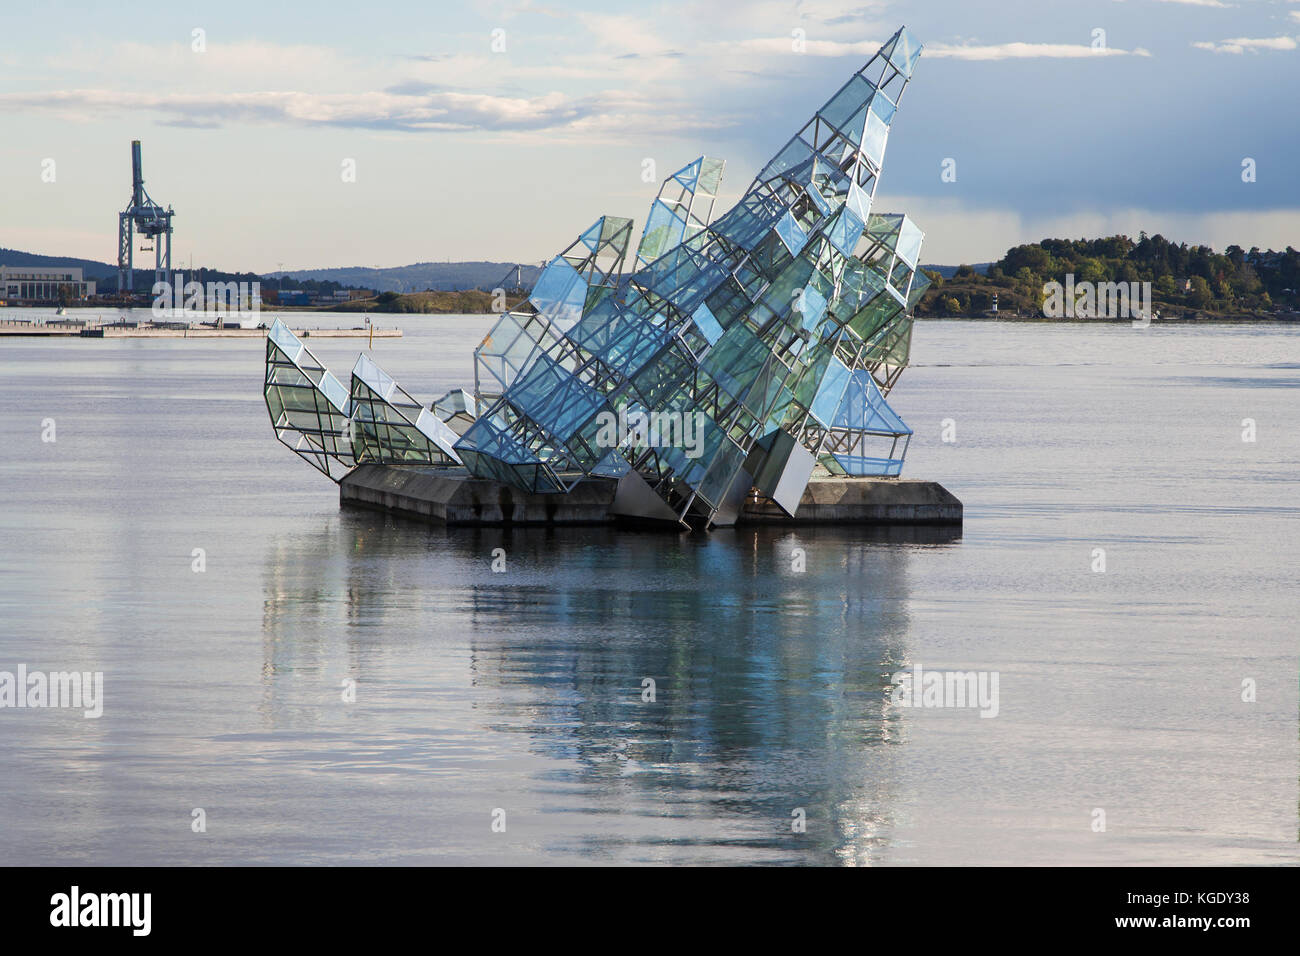 She Lies, sculpture designed by Monica Bonvicini, floating on water next to the Opera House of Oslo, Norway. Stock Photo